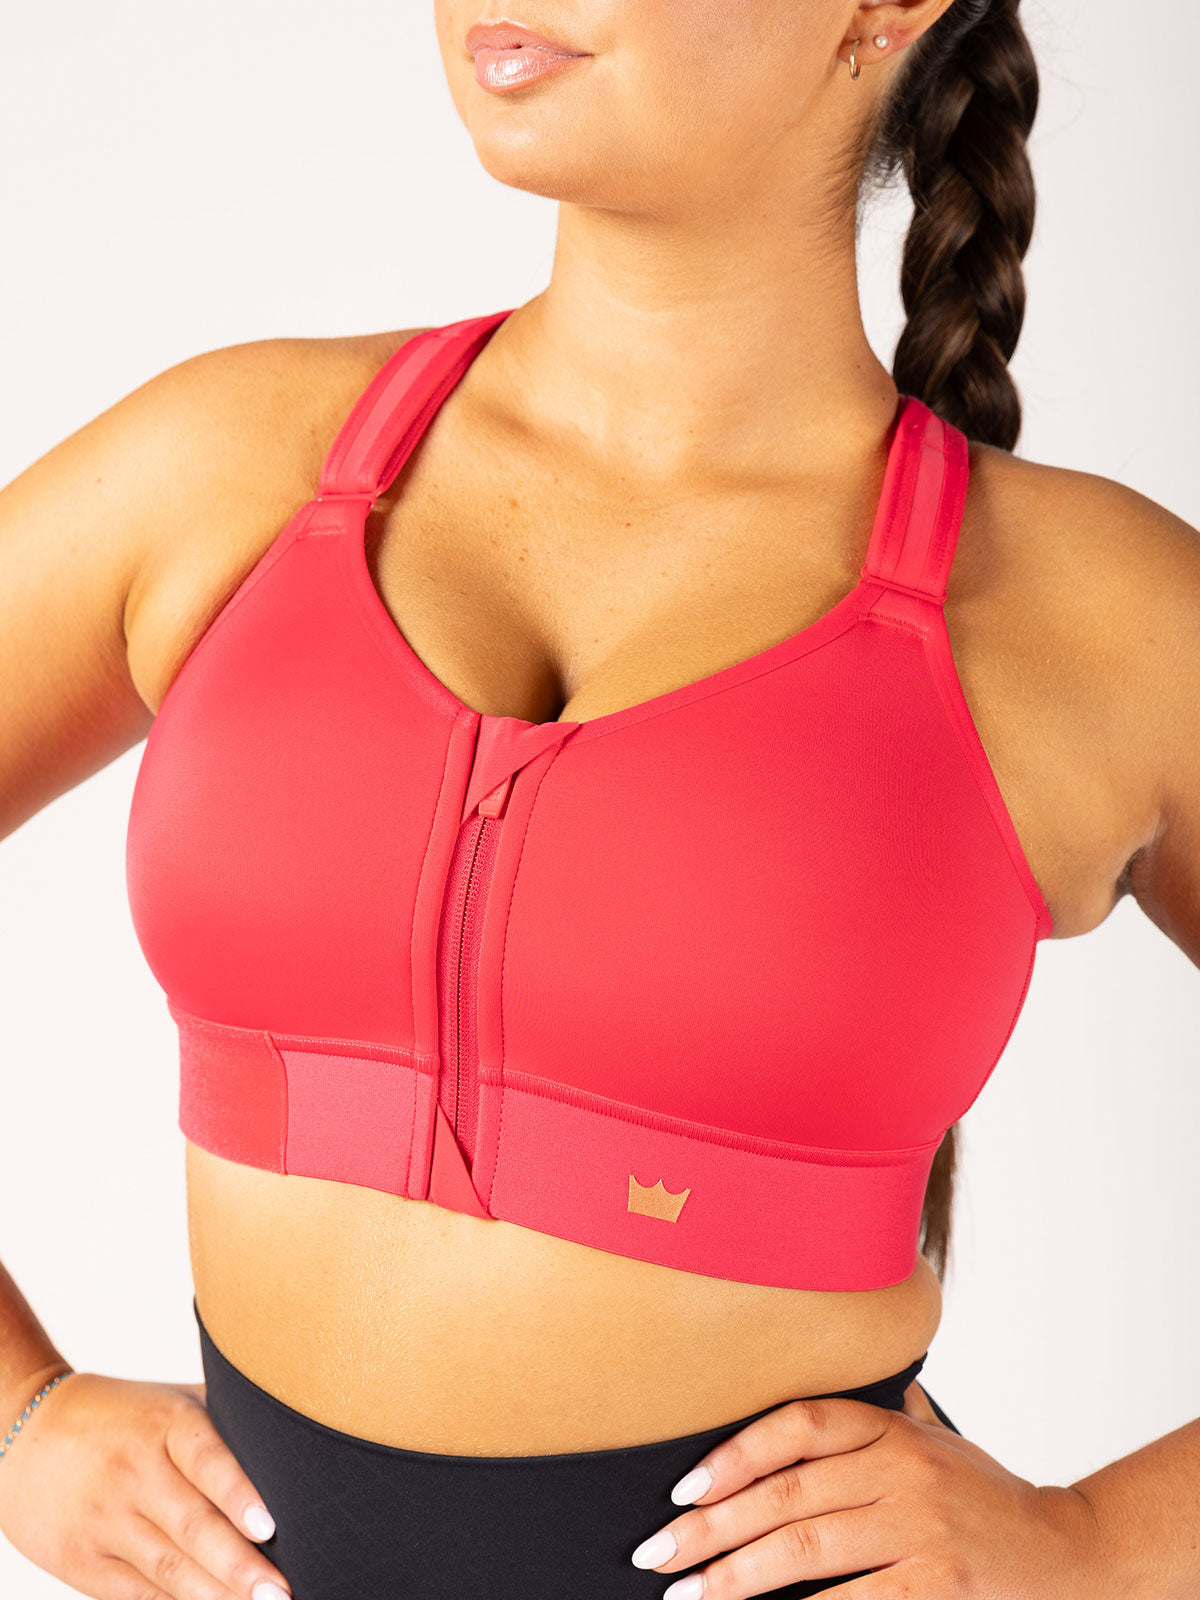 SHEFIT Ultimate Sports Bra Size Luxe New With Tags Nepal